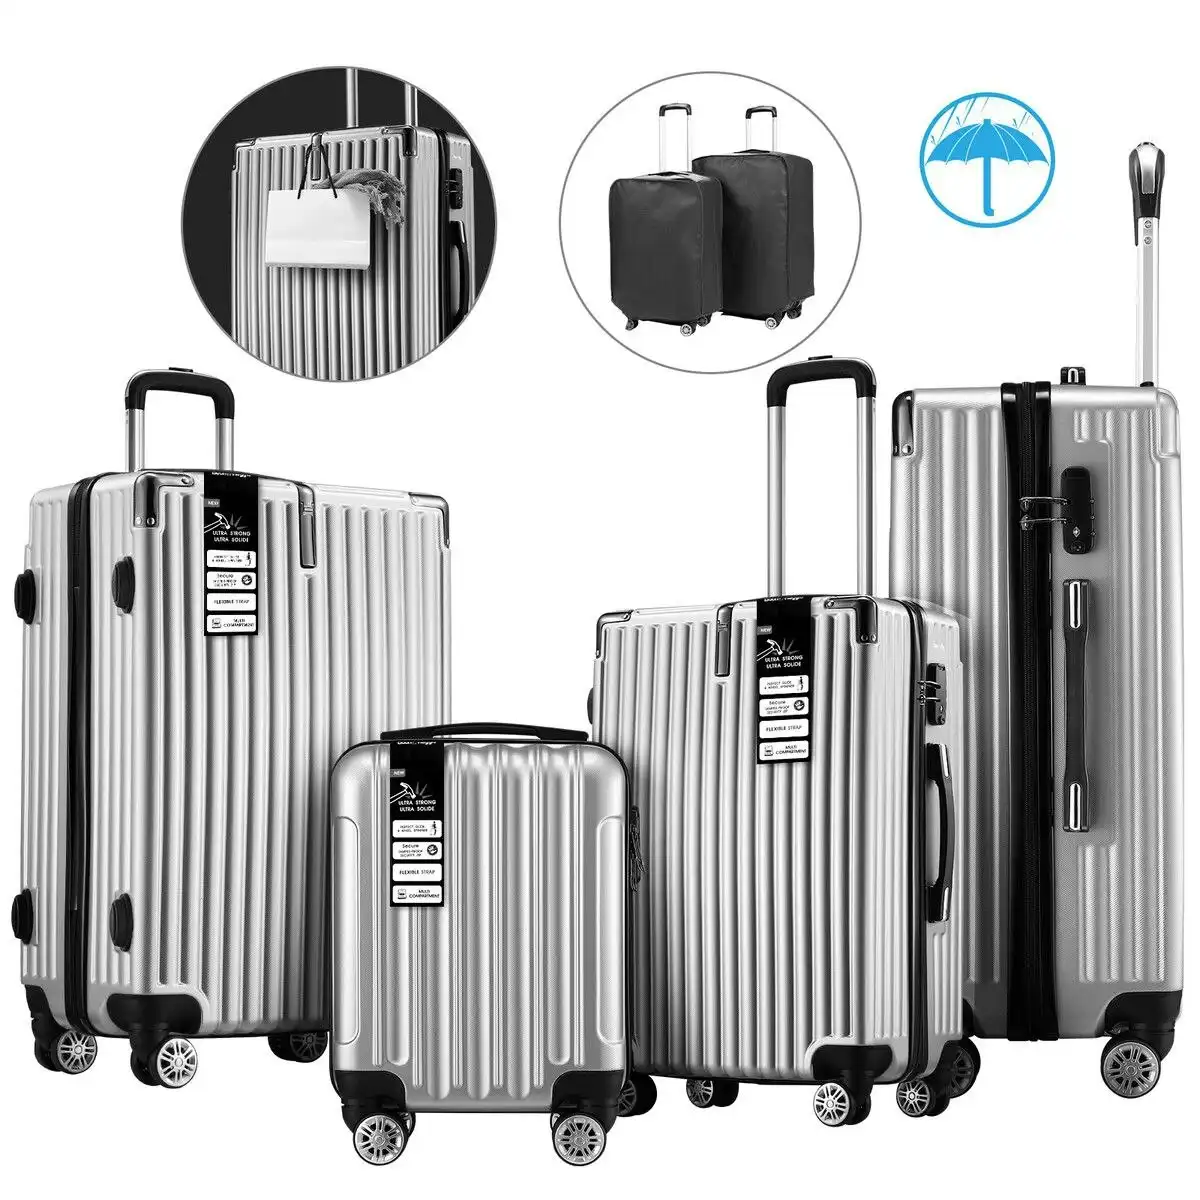 Ausway 4 Piece Carry On Luggage Set Suitcases Hard Shell Traveller Bag Rolling Trolley Checked TSA Lock Front Hook Lightweight Silver